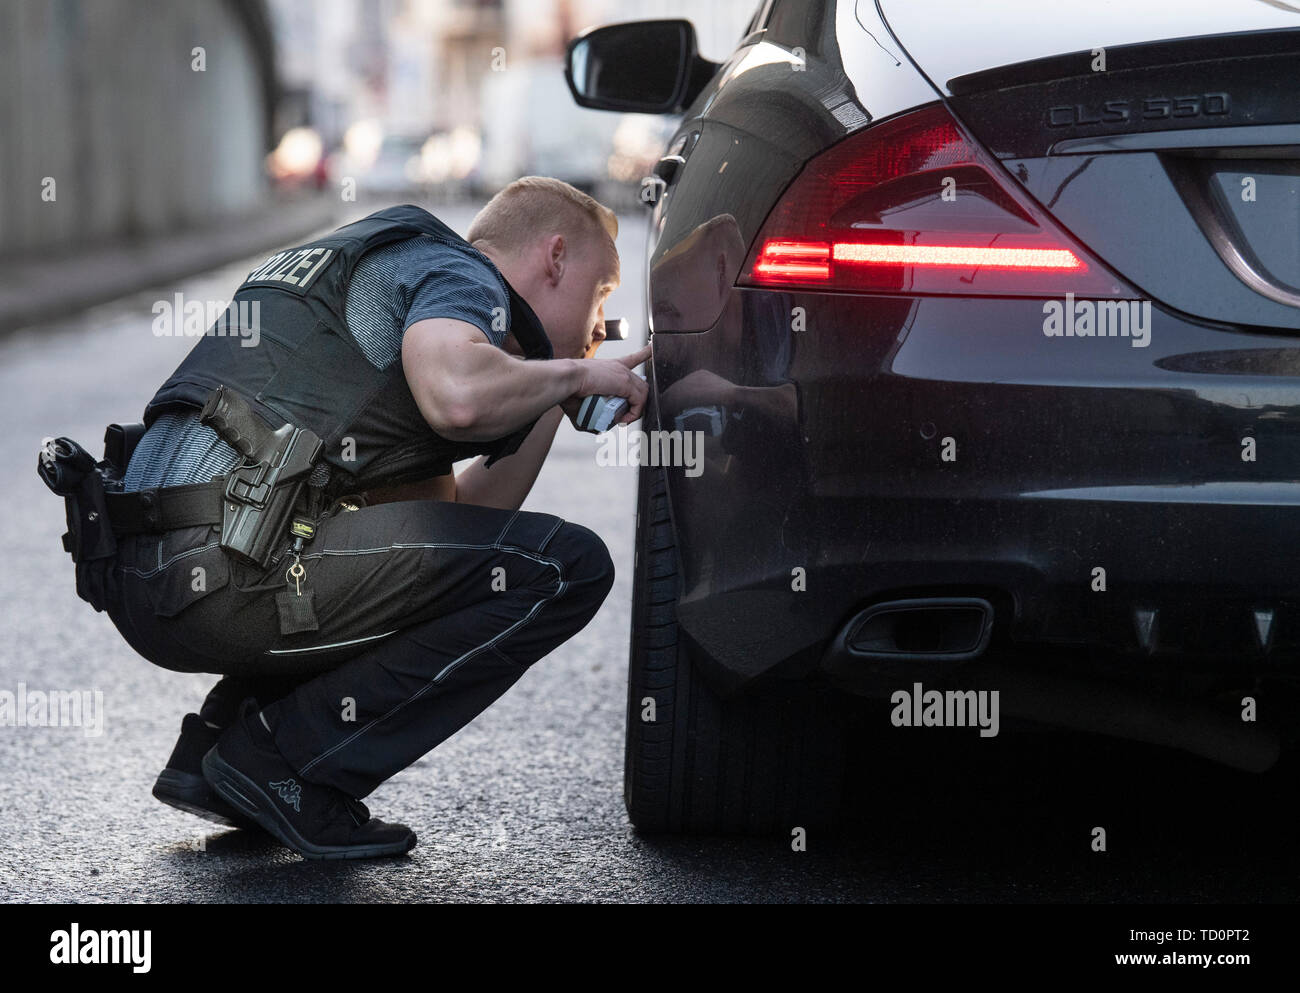 07 June 2019, Hessen, Frankfurt/Main: A police officer of the "Autoposer Raser Tuner Control Unit" (KART) uses a flashlight to check the rims of a Mercedes CLS 550 that had caught the attention of police officers in the city centre. The vehicle has been seized. (Zu dpa "Control unit KART on tour - expensive evening for Poser") Photo: Boris Roessler/dpa Stock Photo